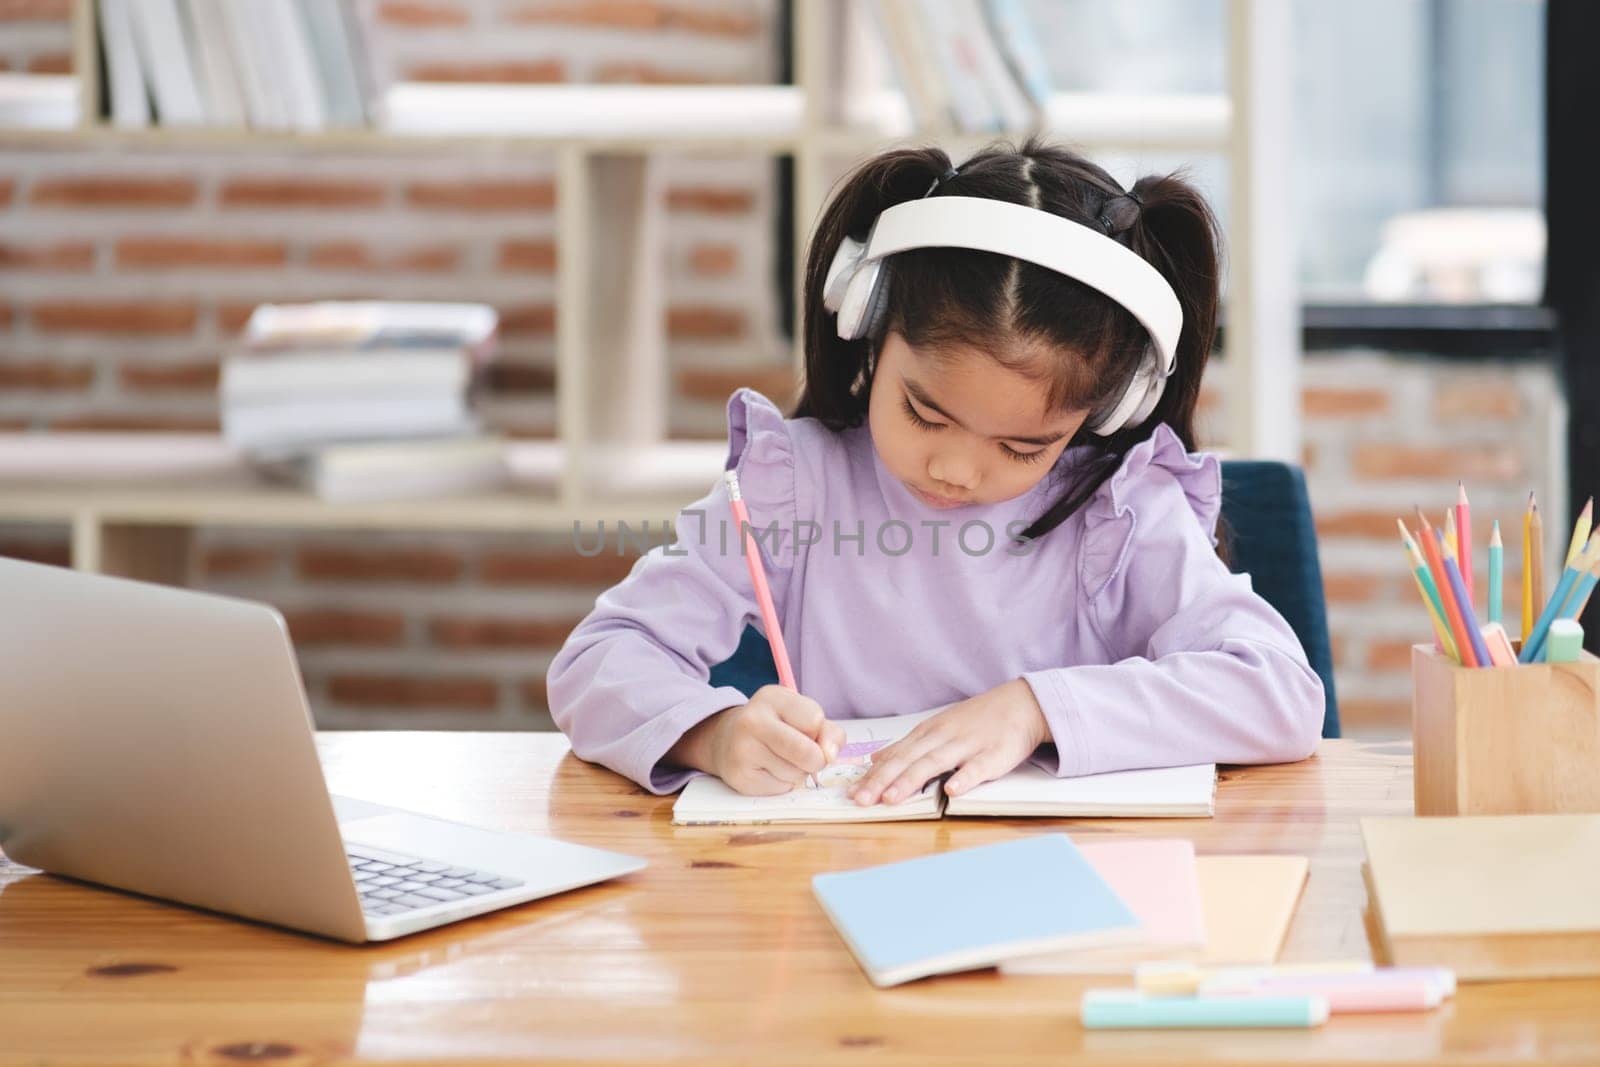 A young girl is sitting at a desk with a laptop and a notebook. She is writing in her notebook and wearing headphones. The scene suggests that she is working on a project or studying for an exam